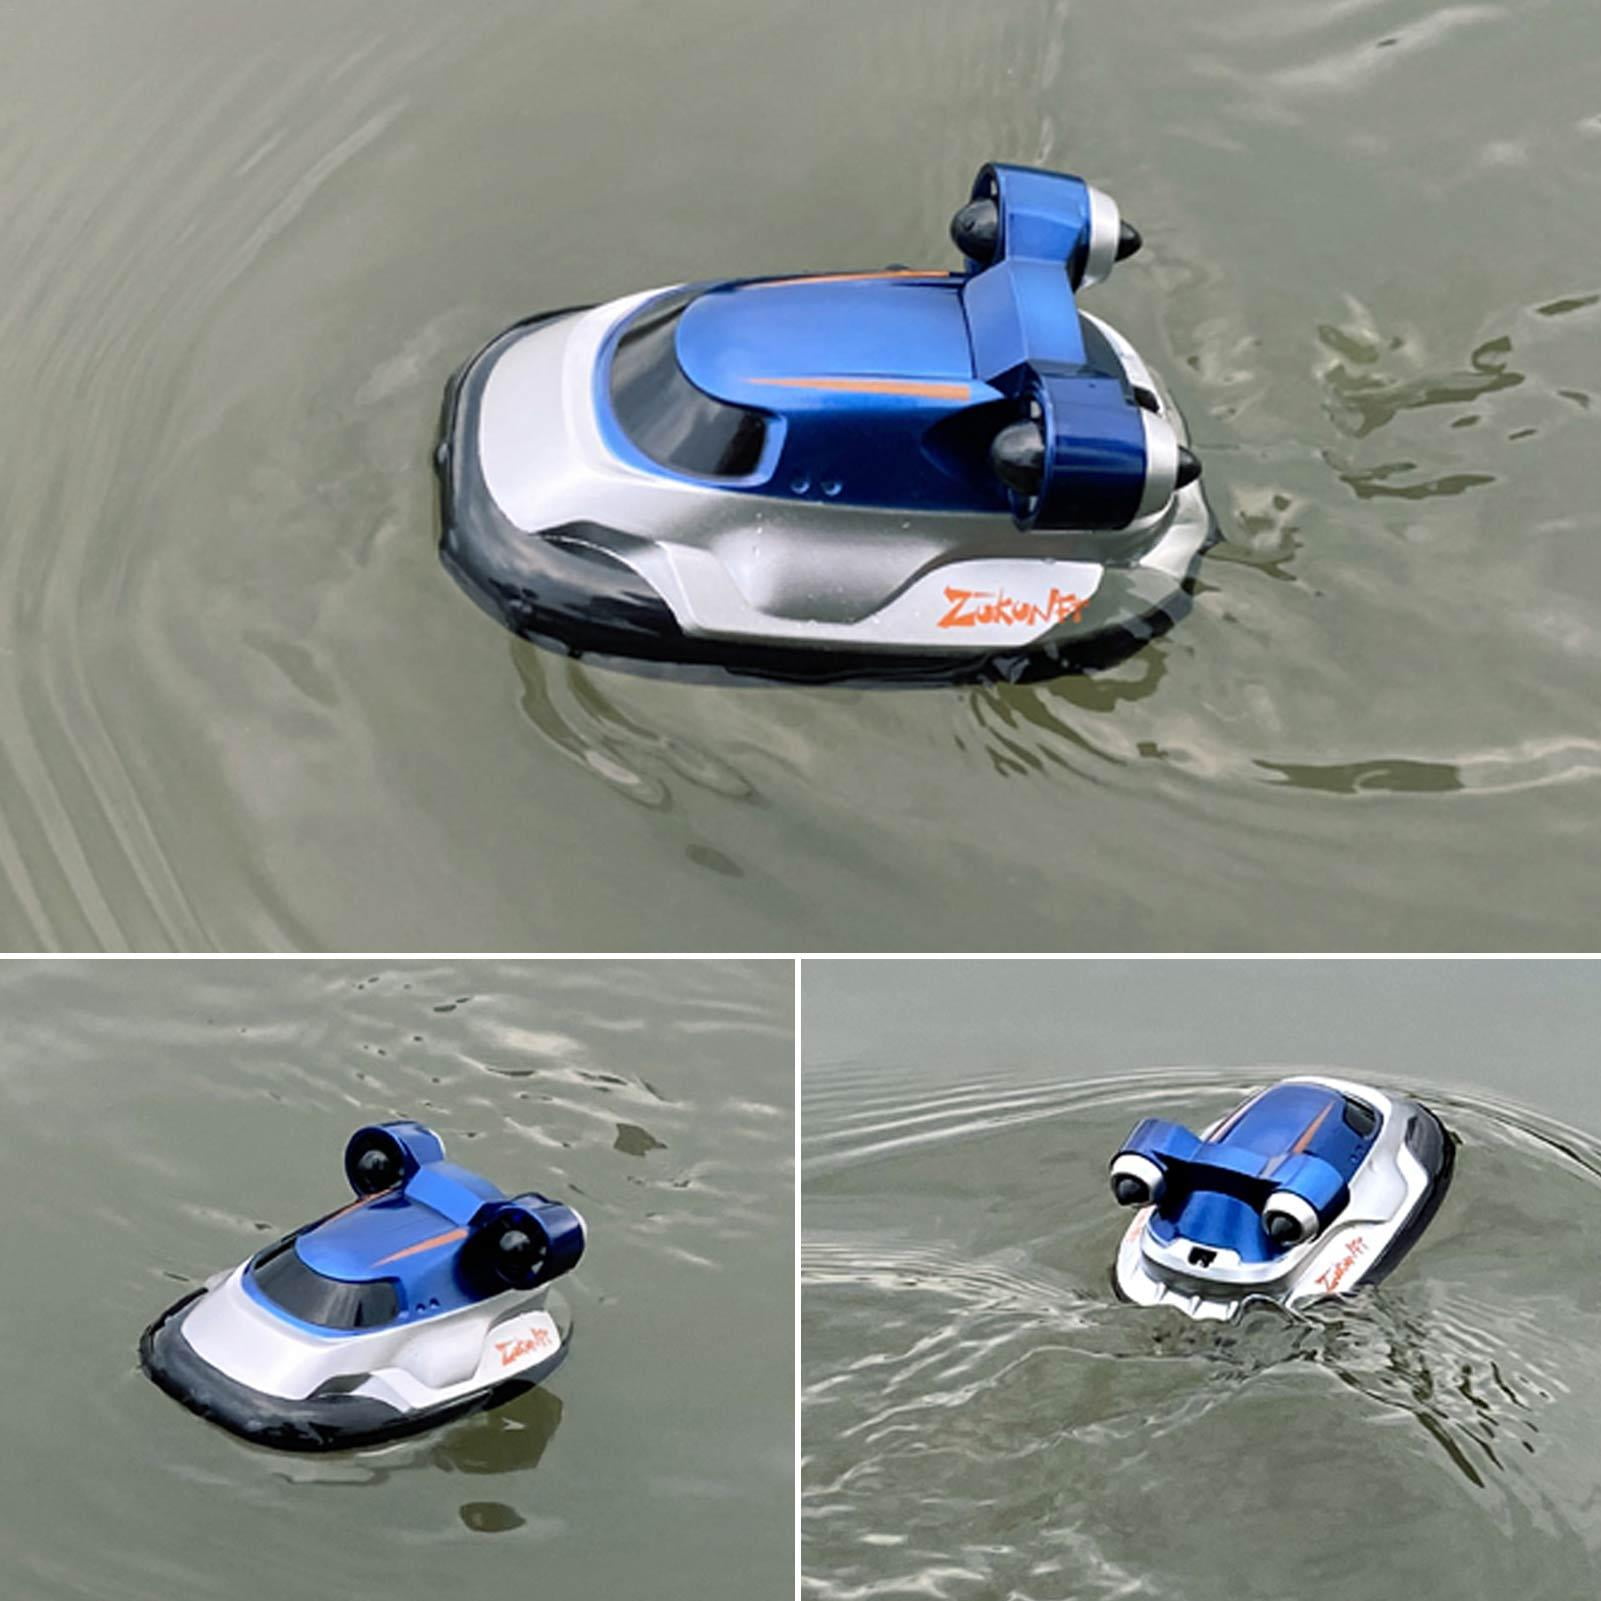 Autcarible 2.4G Mini Remote Control Boat RC Hovercraft Toy Gift for Kids